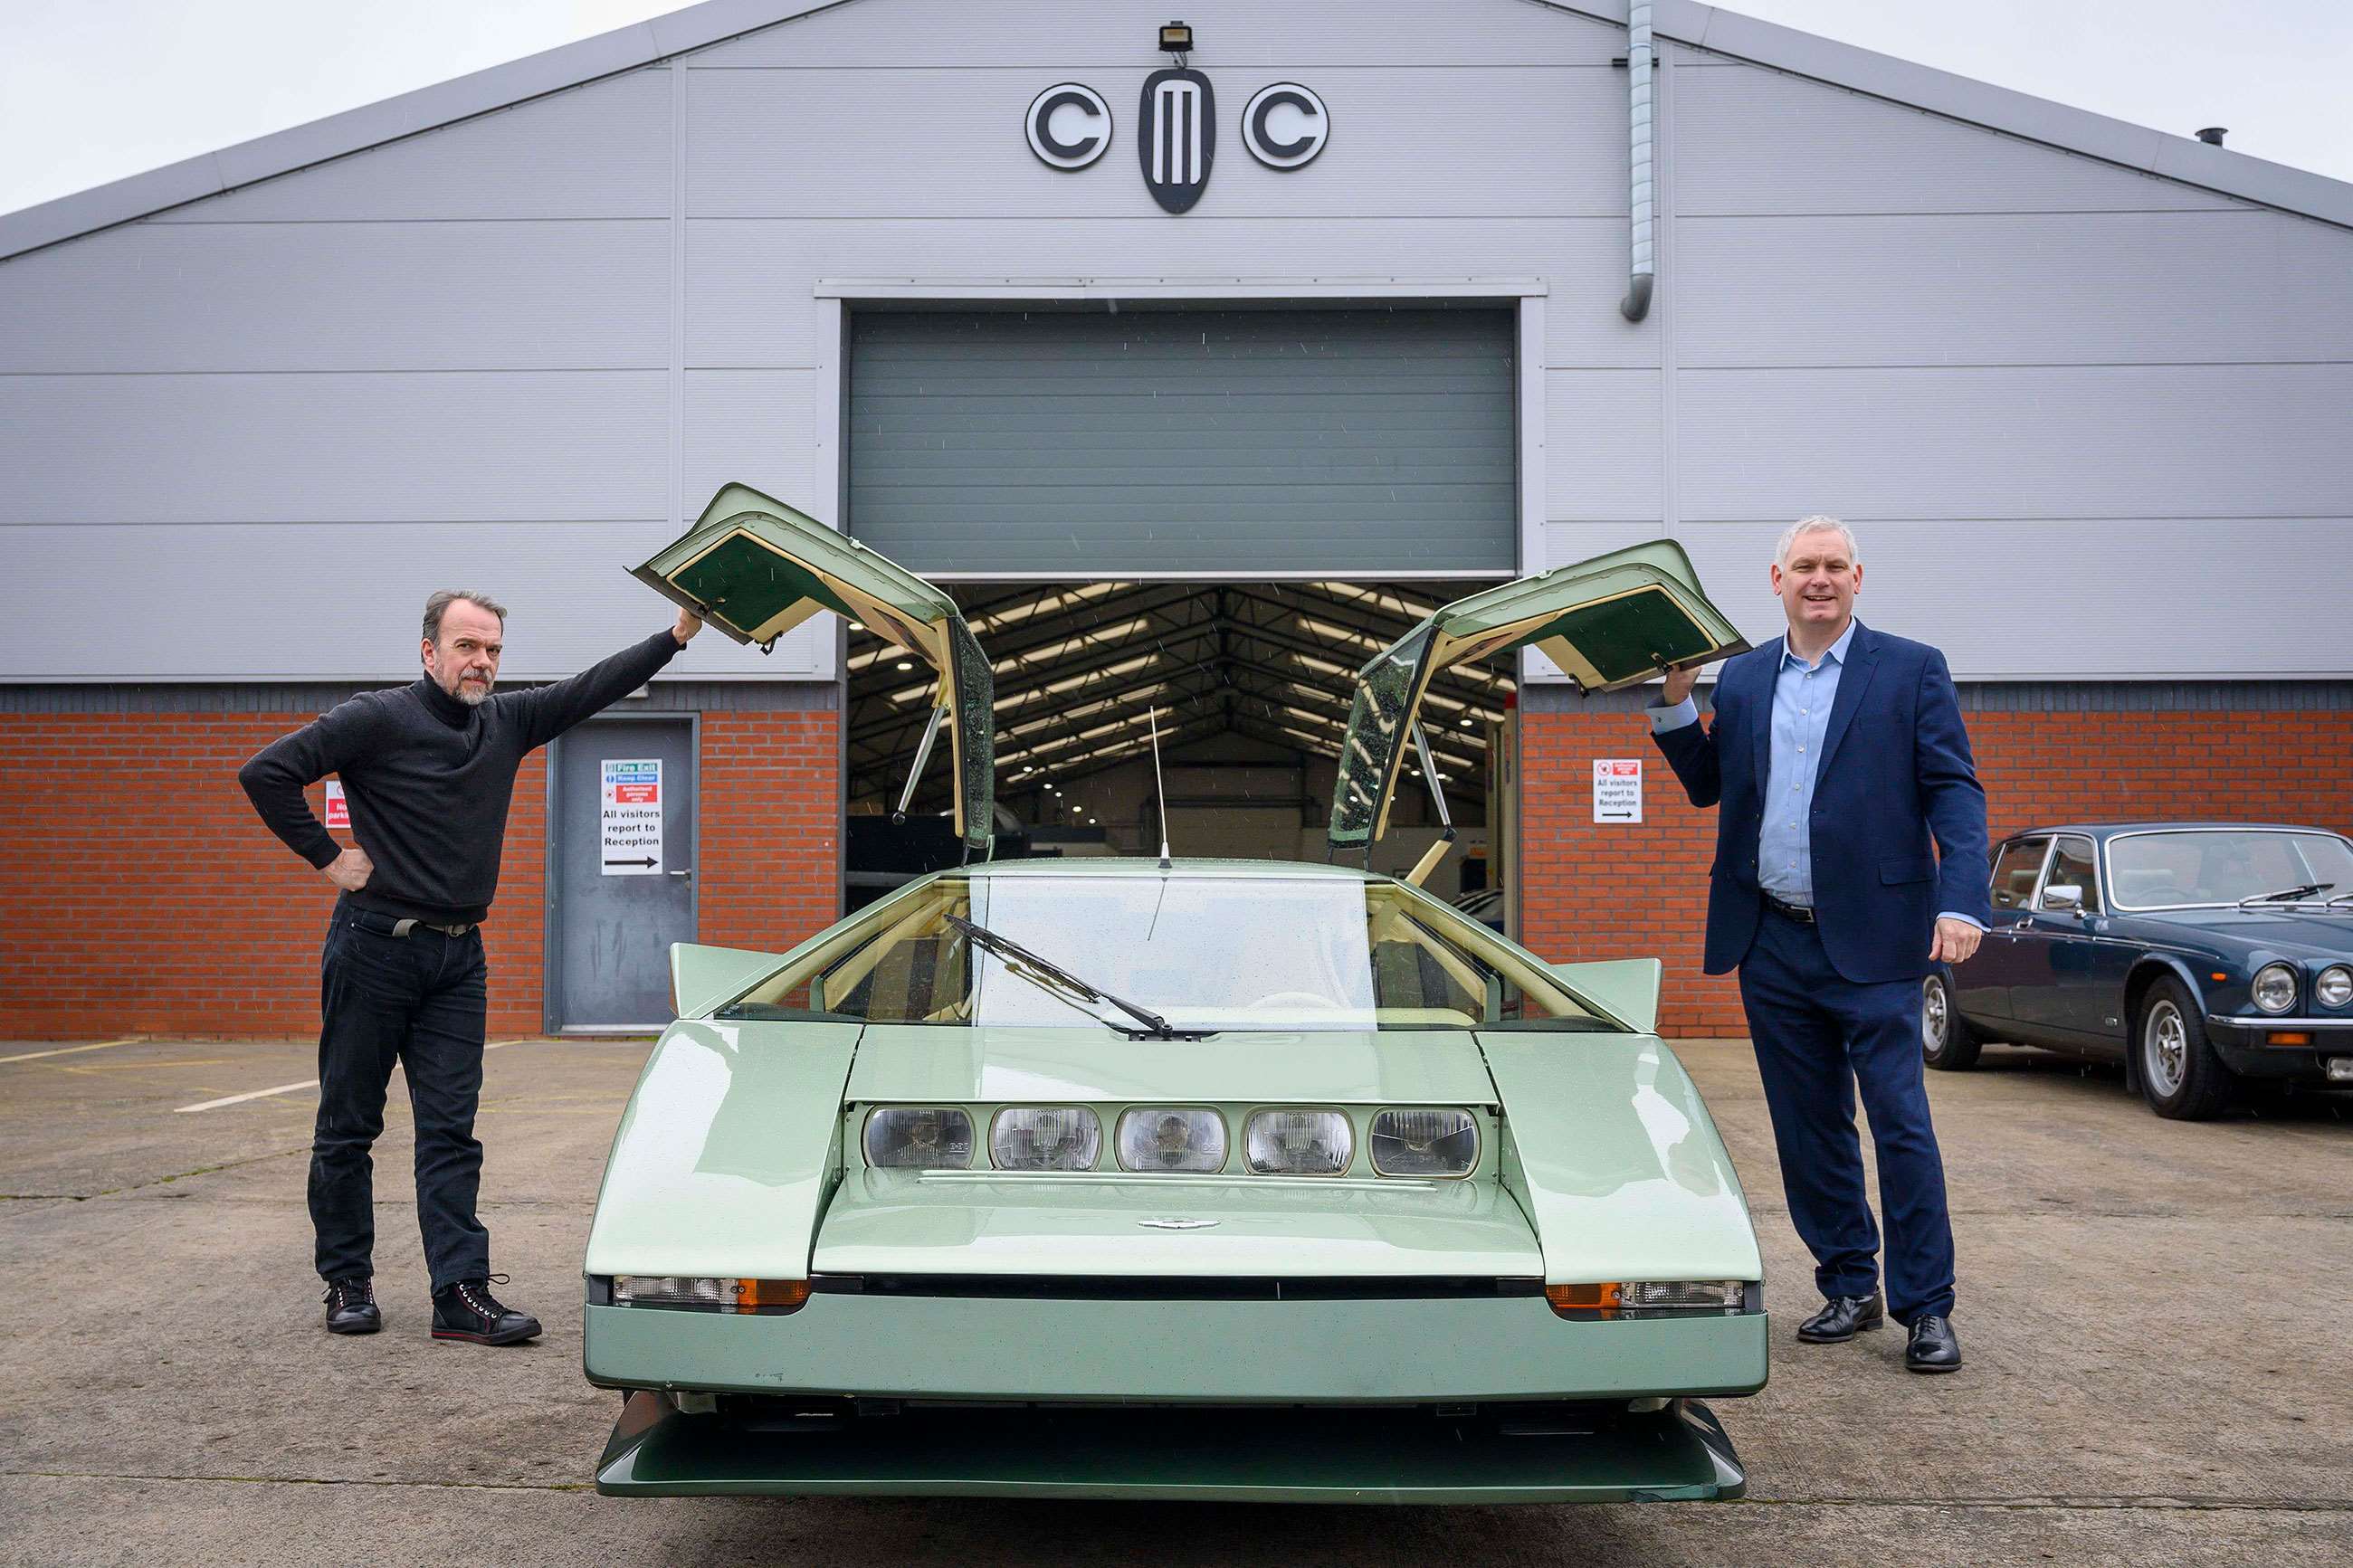 Tim Griffin (left) and Nigel Woodward (right) of Classic Motor Cars Bridgnorth.